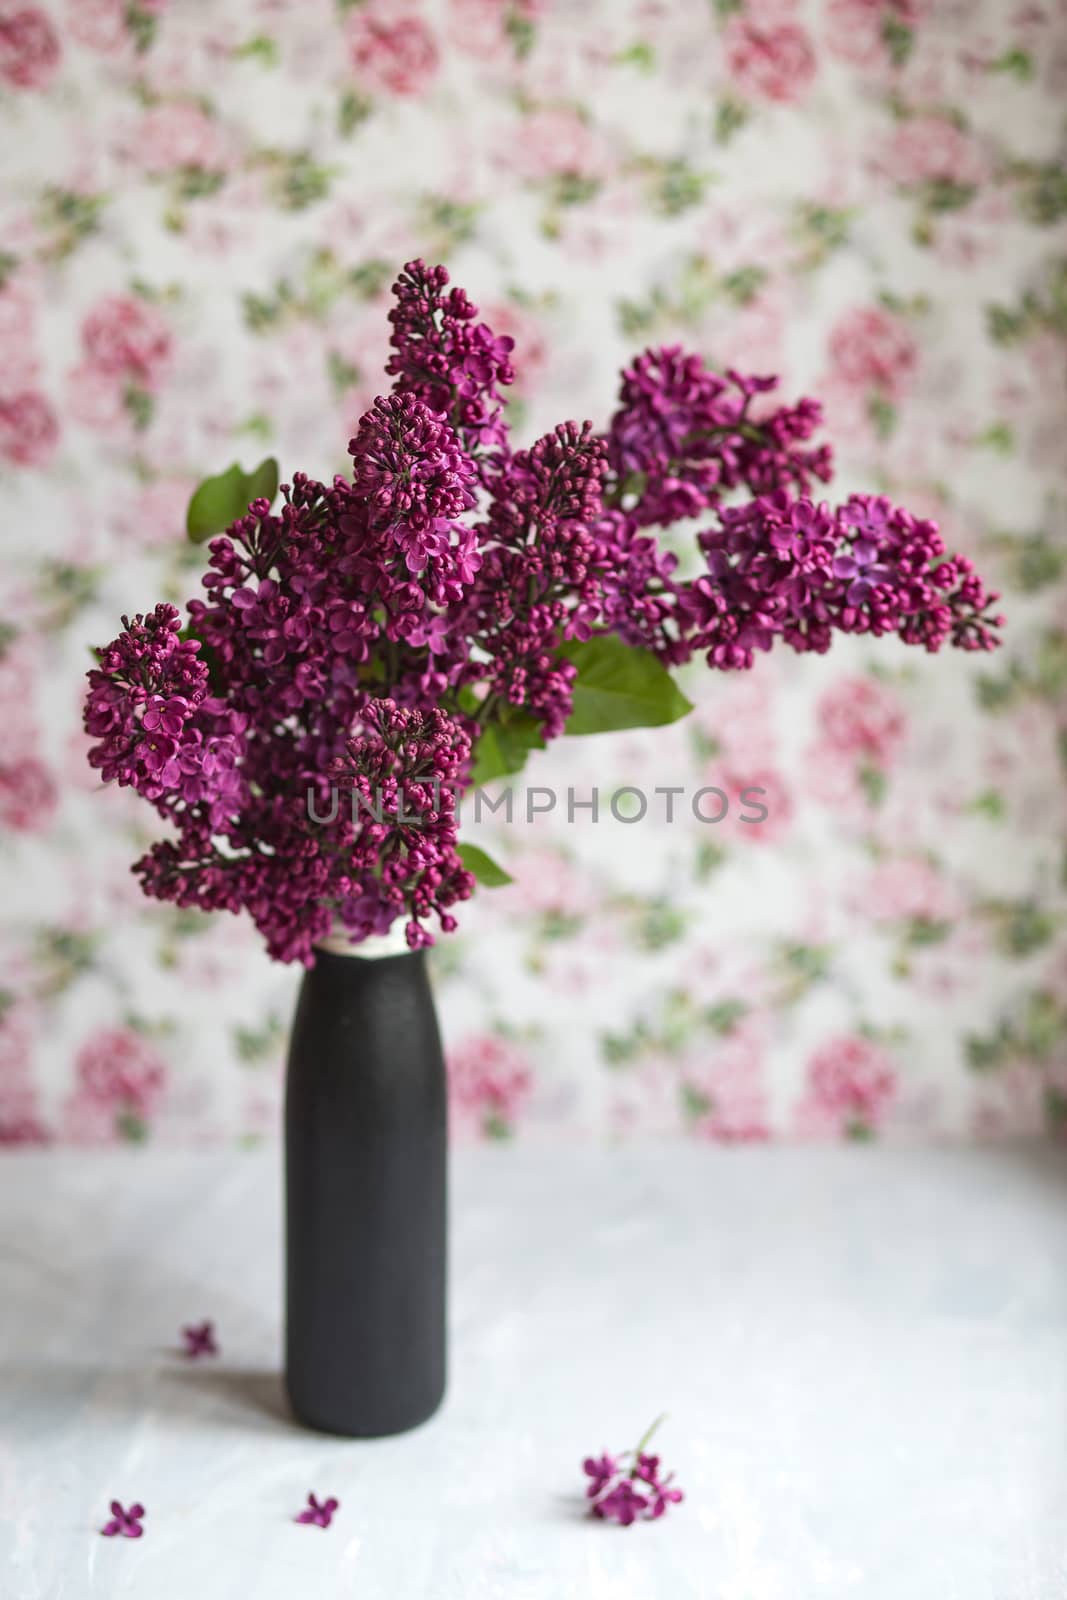 Bouquet of violet lilac in a black vase. Still life with blooming branches of lilac in vases. Greeting card mock up.